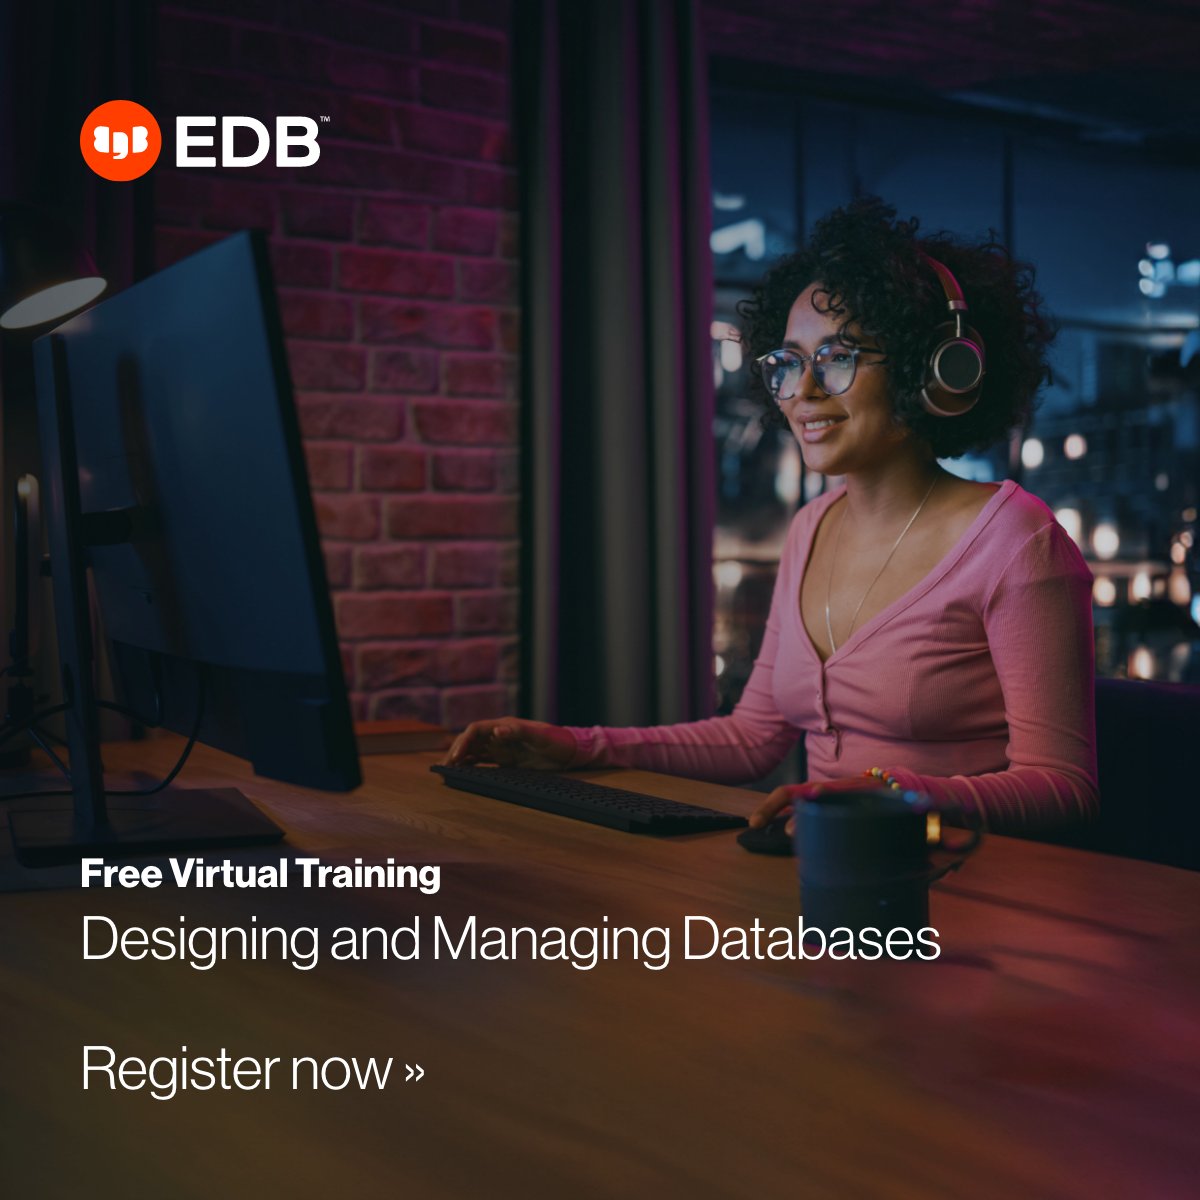 Join our certified Postgres experts for a free virtual training session on 'Designing and Managing Databases.' Enhance your skills, learn from real-world scenarios and unleash the power of Postgres. Register now: bit.ly/3TOO19v #PostgreSQL #FreeTraining #opensource